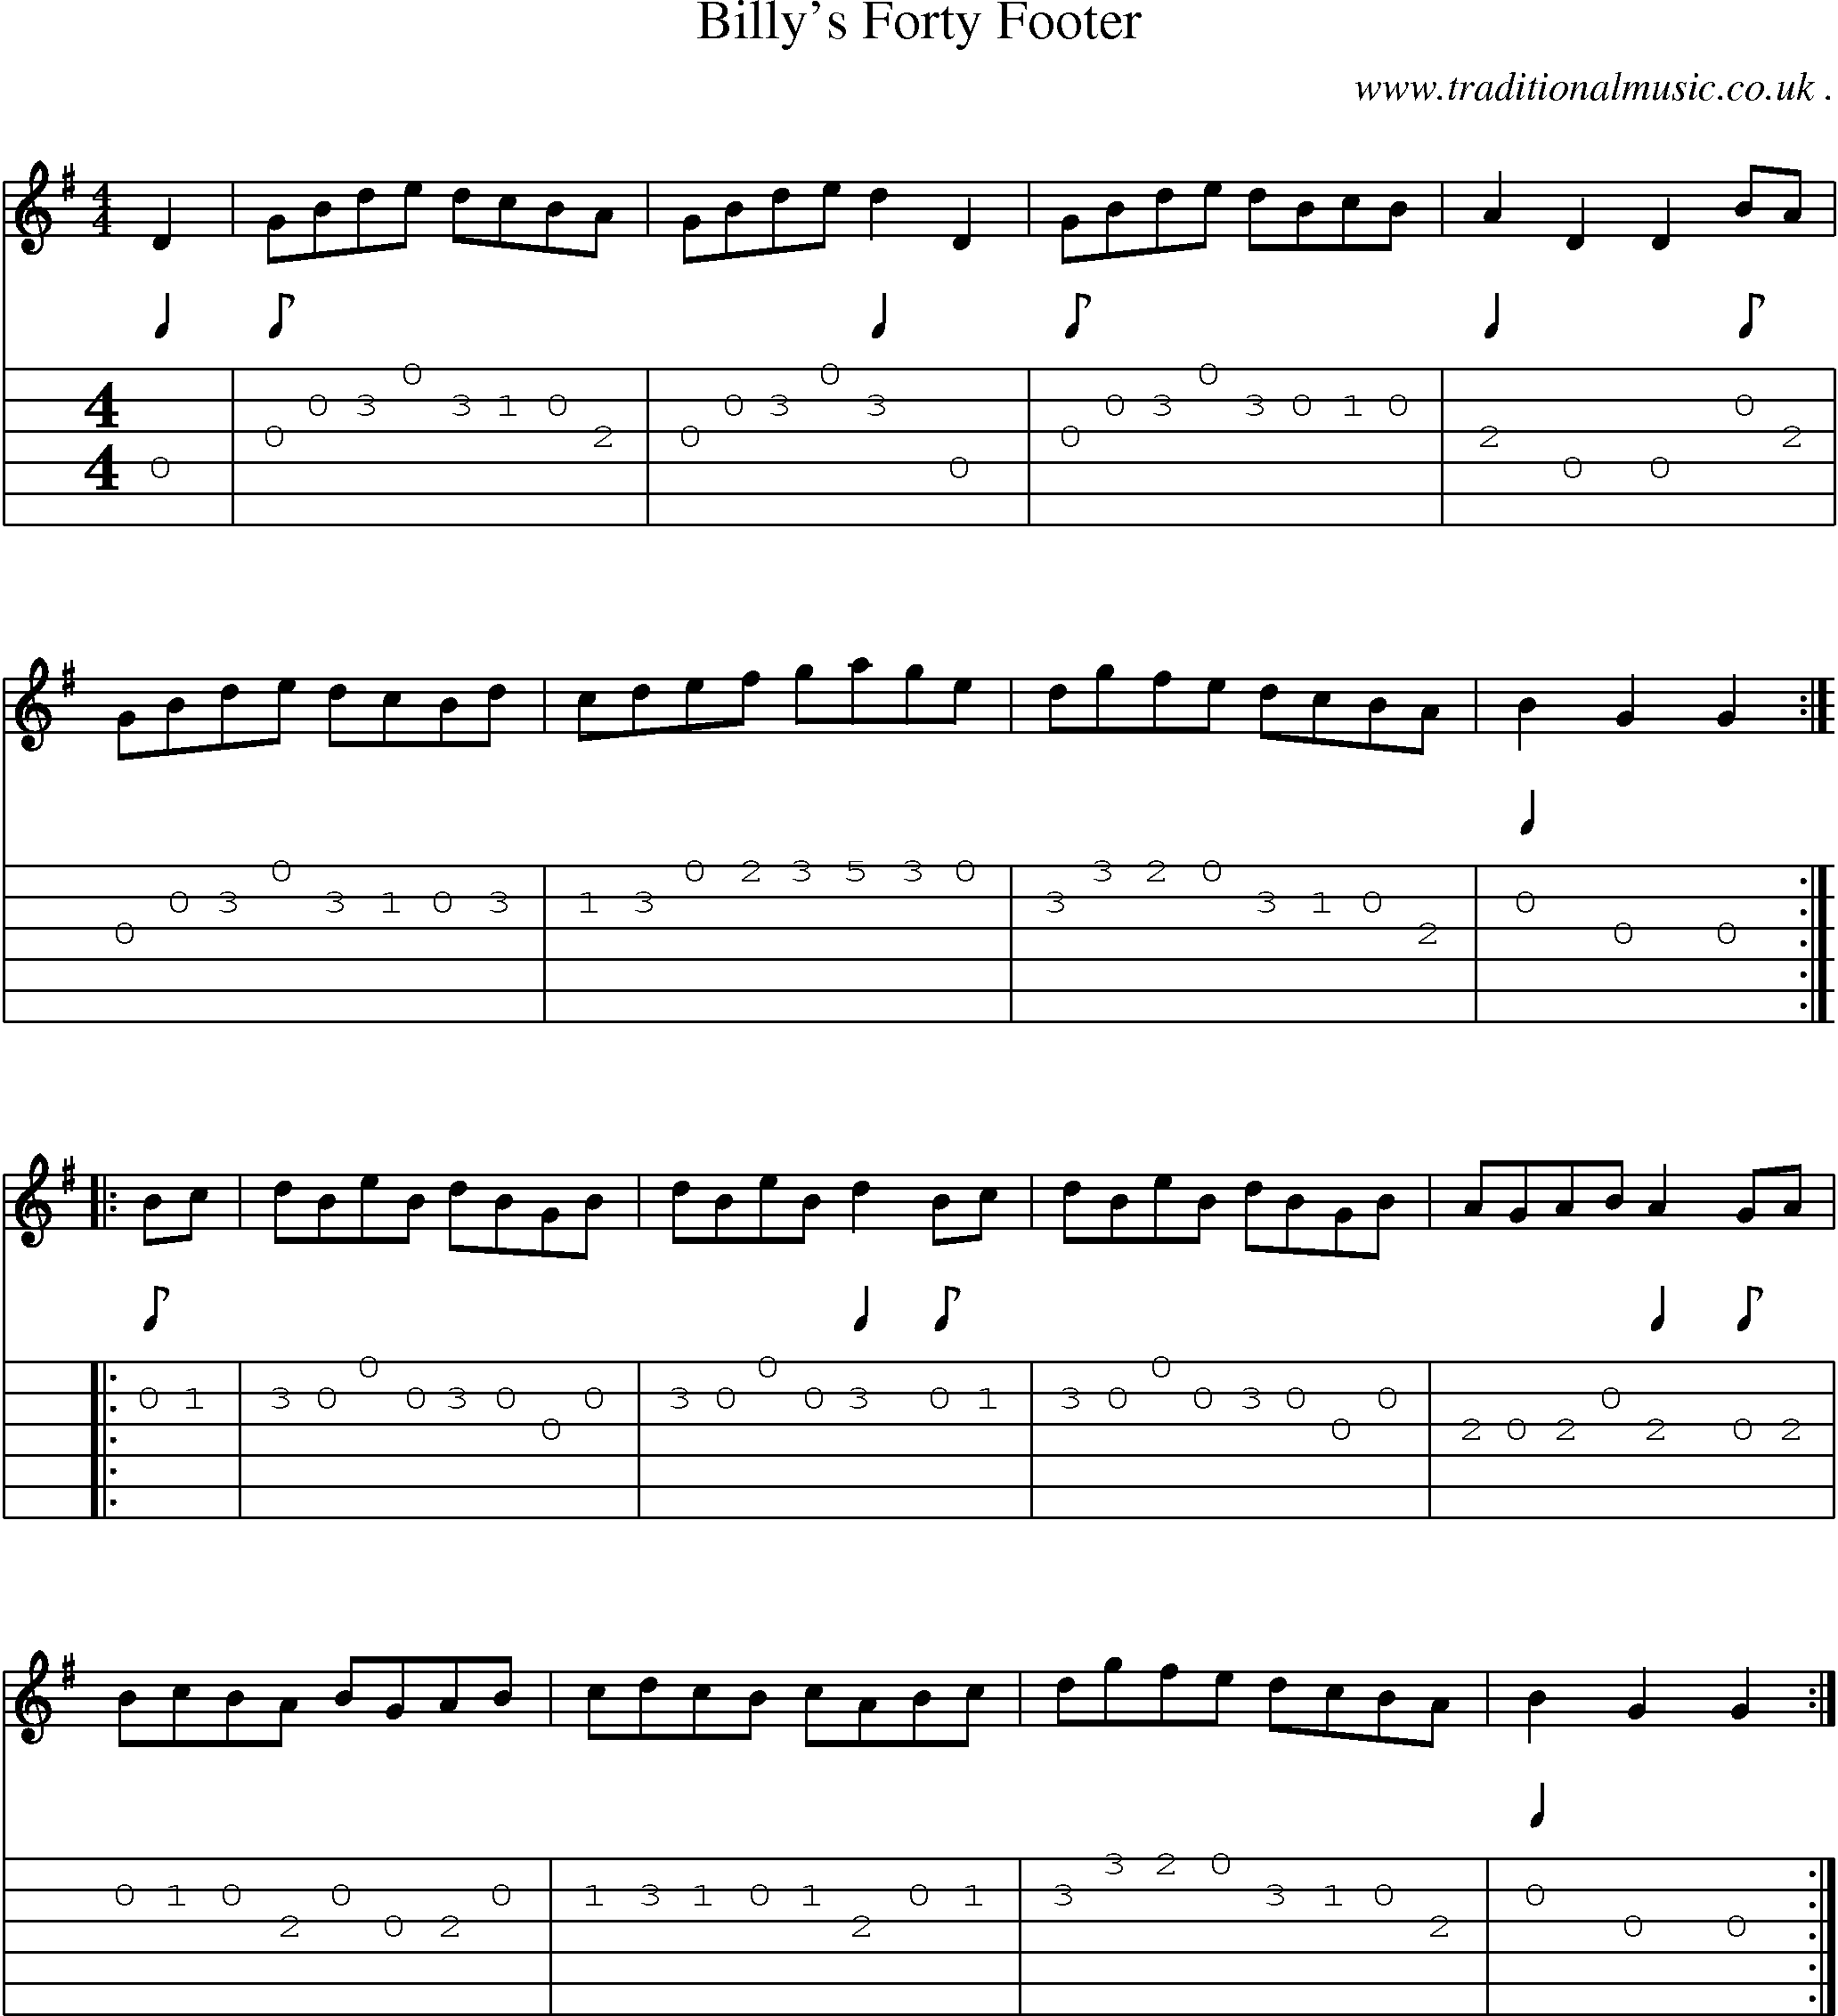 Sheet-Music and Guitar Tabs for Billys Forty Footer